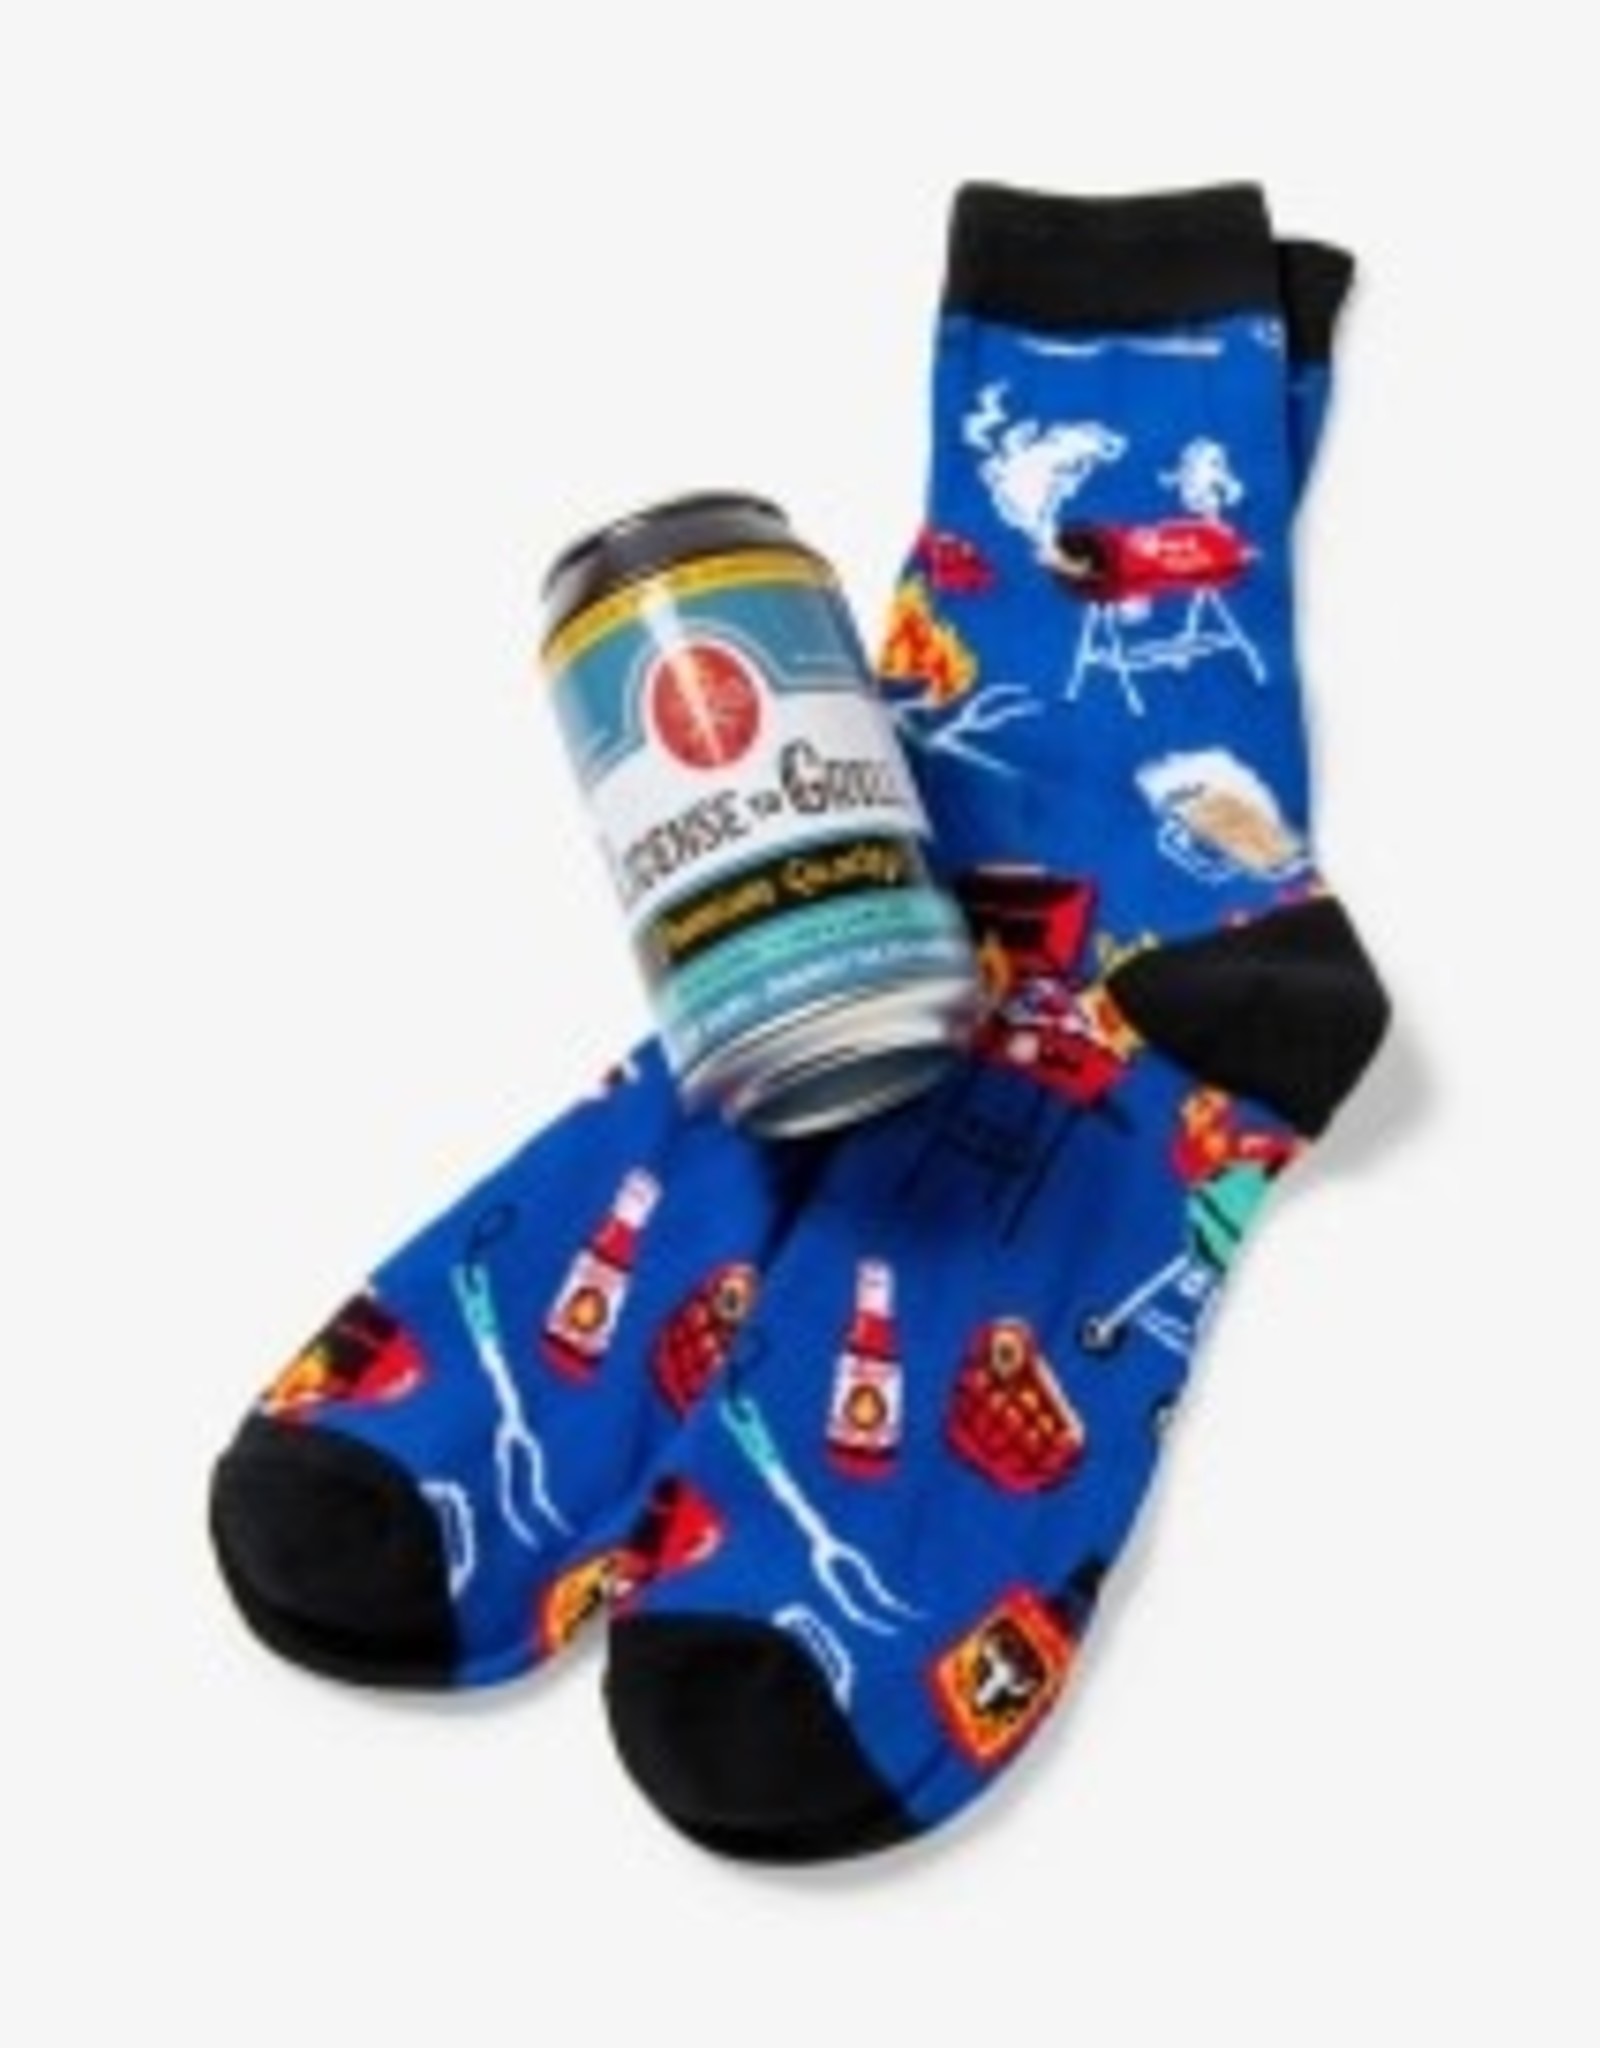 Little Blue House Beer Can Socks - License to Grill